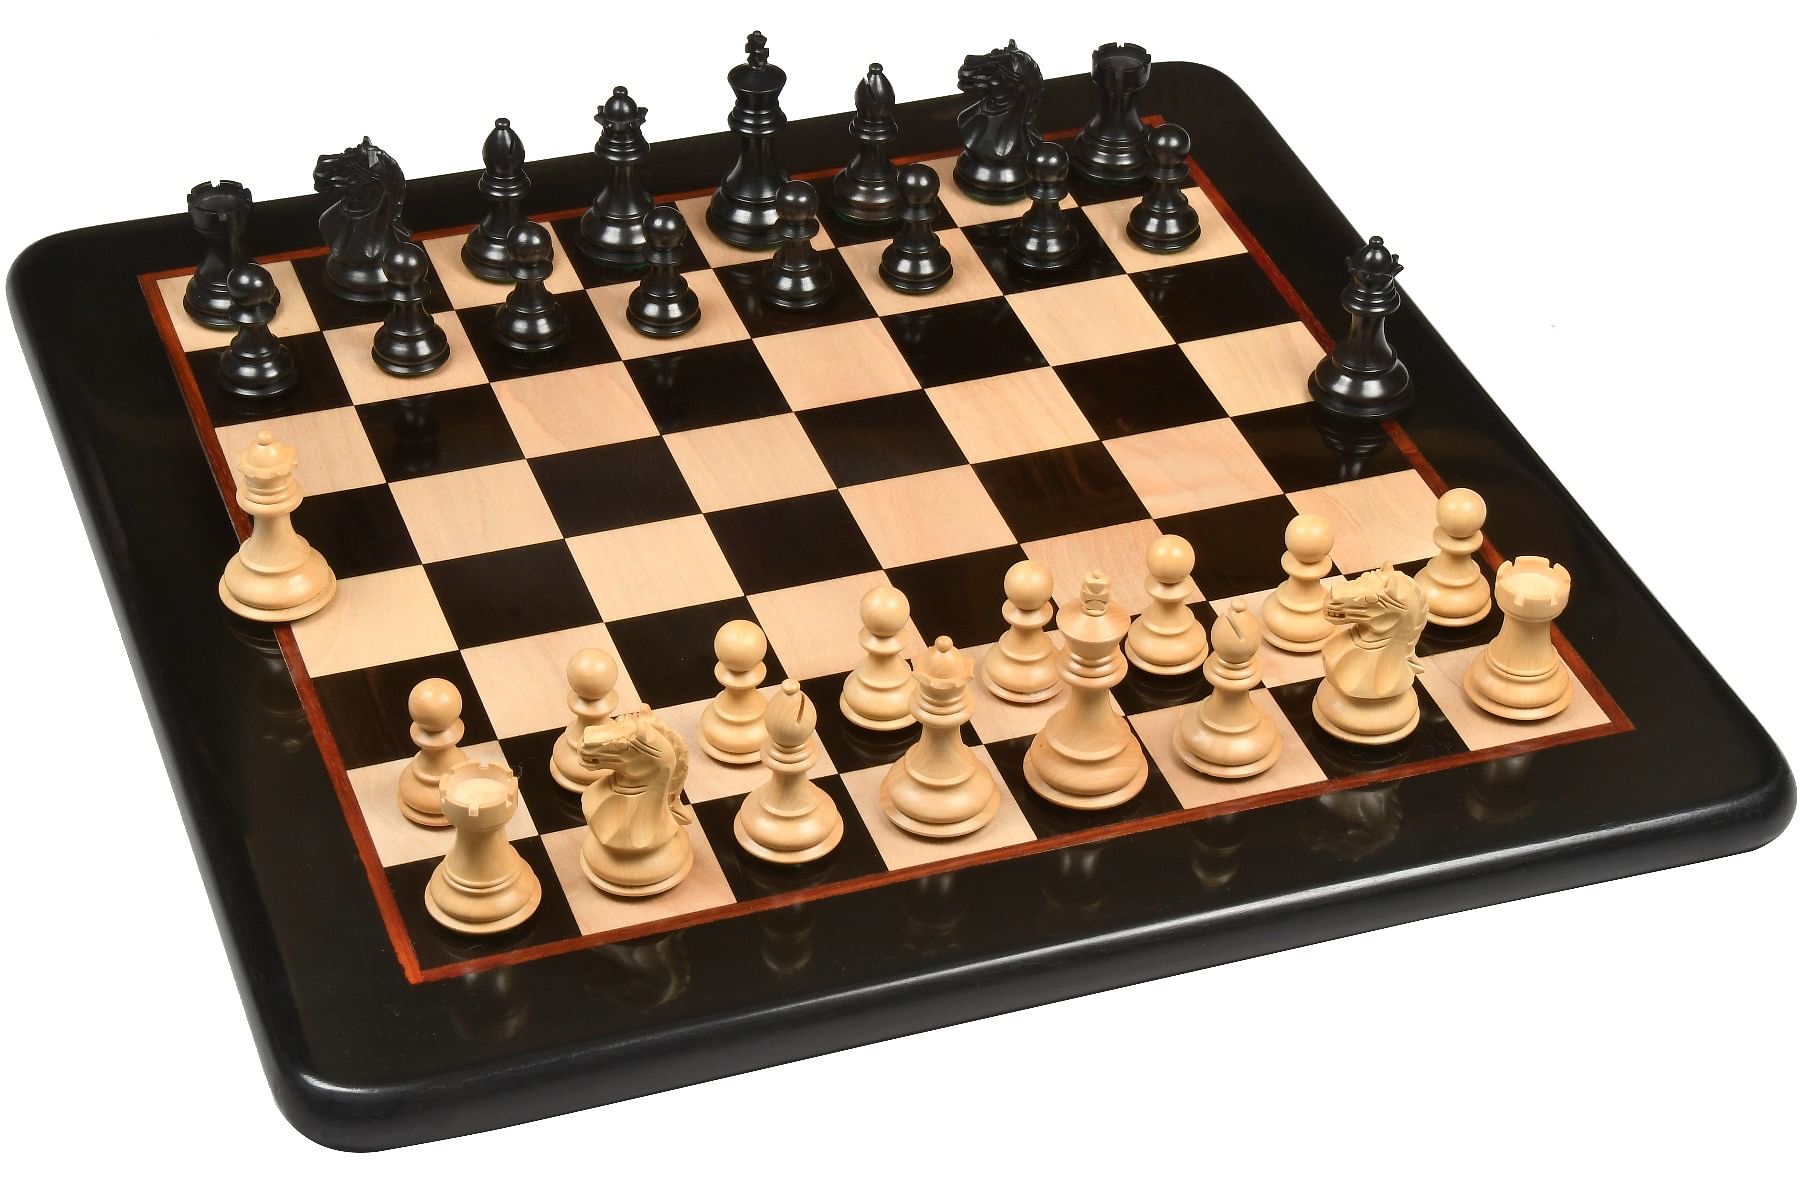 Combo of Fierce Knight Staunton Series Wooden Chess Pieces In Ebony & Box Wood - 3.0